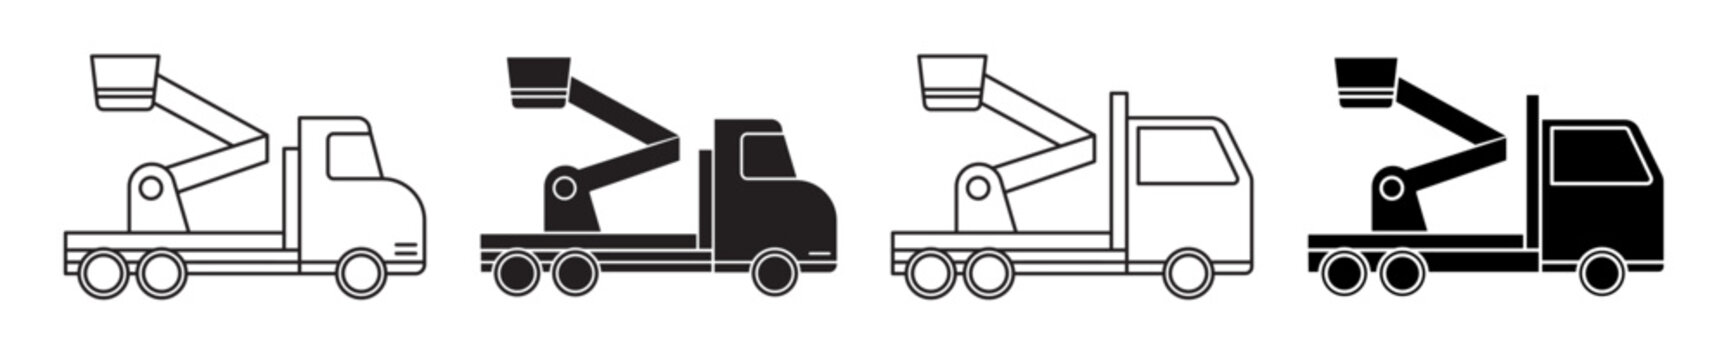 Cherry picker truck icon set. Scissor bucket lift vector symbol in black filled and outlined style. Telescopic boom lift sign. 